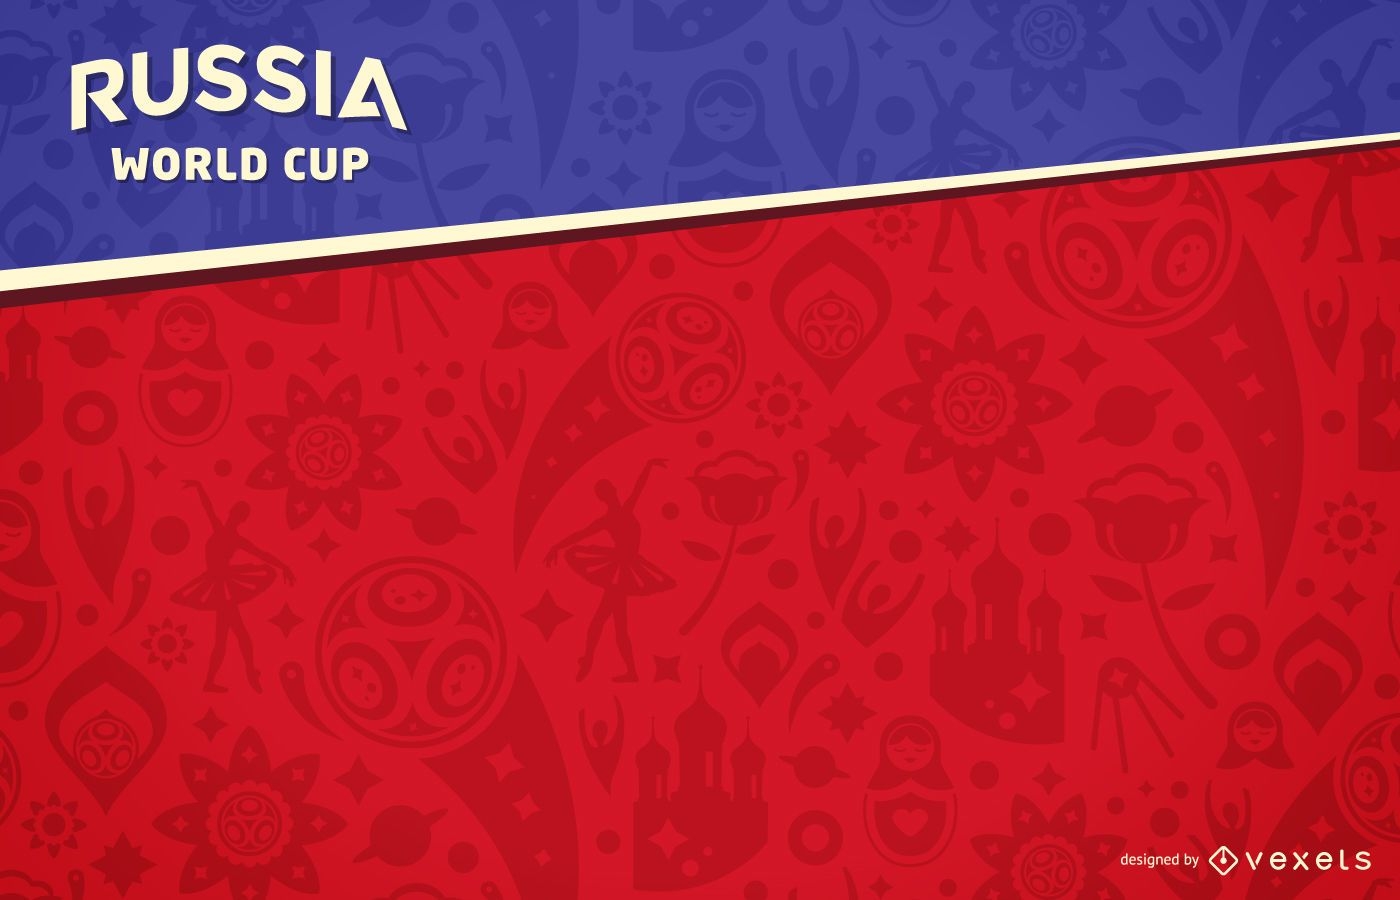  Russia World Cup background